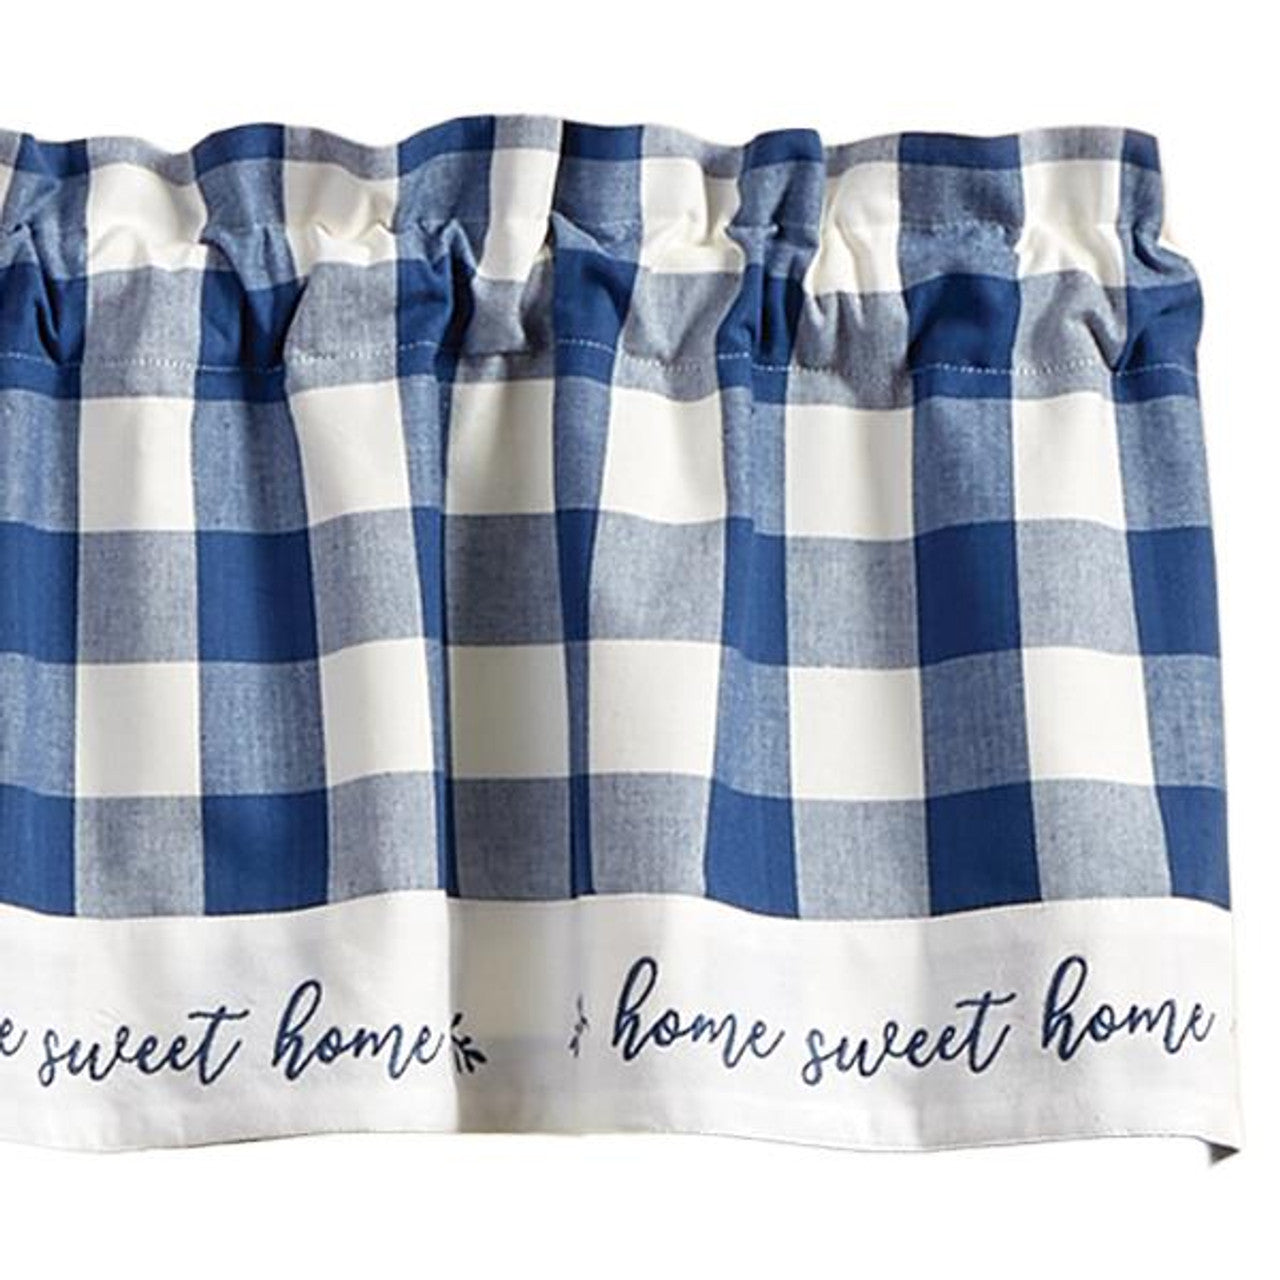 Wicklow Check Home Valance China Blue